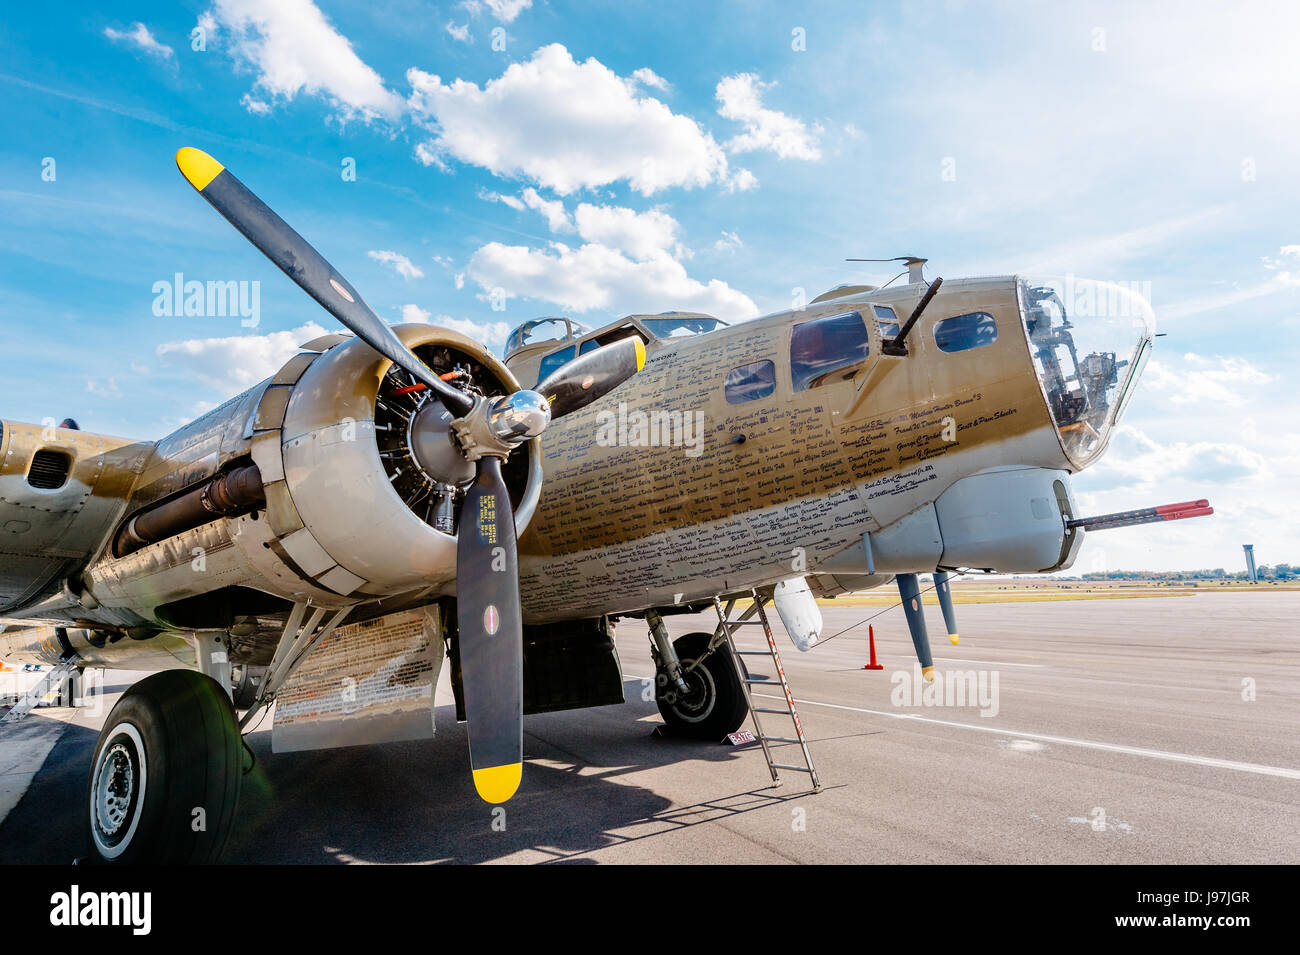 Restored WWII bomber, a B-17 Flying Fortress, on static display at the Montgomery, Alabama Airport, part of a a flying museum on tour. Stock Photo